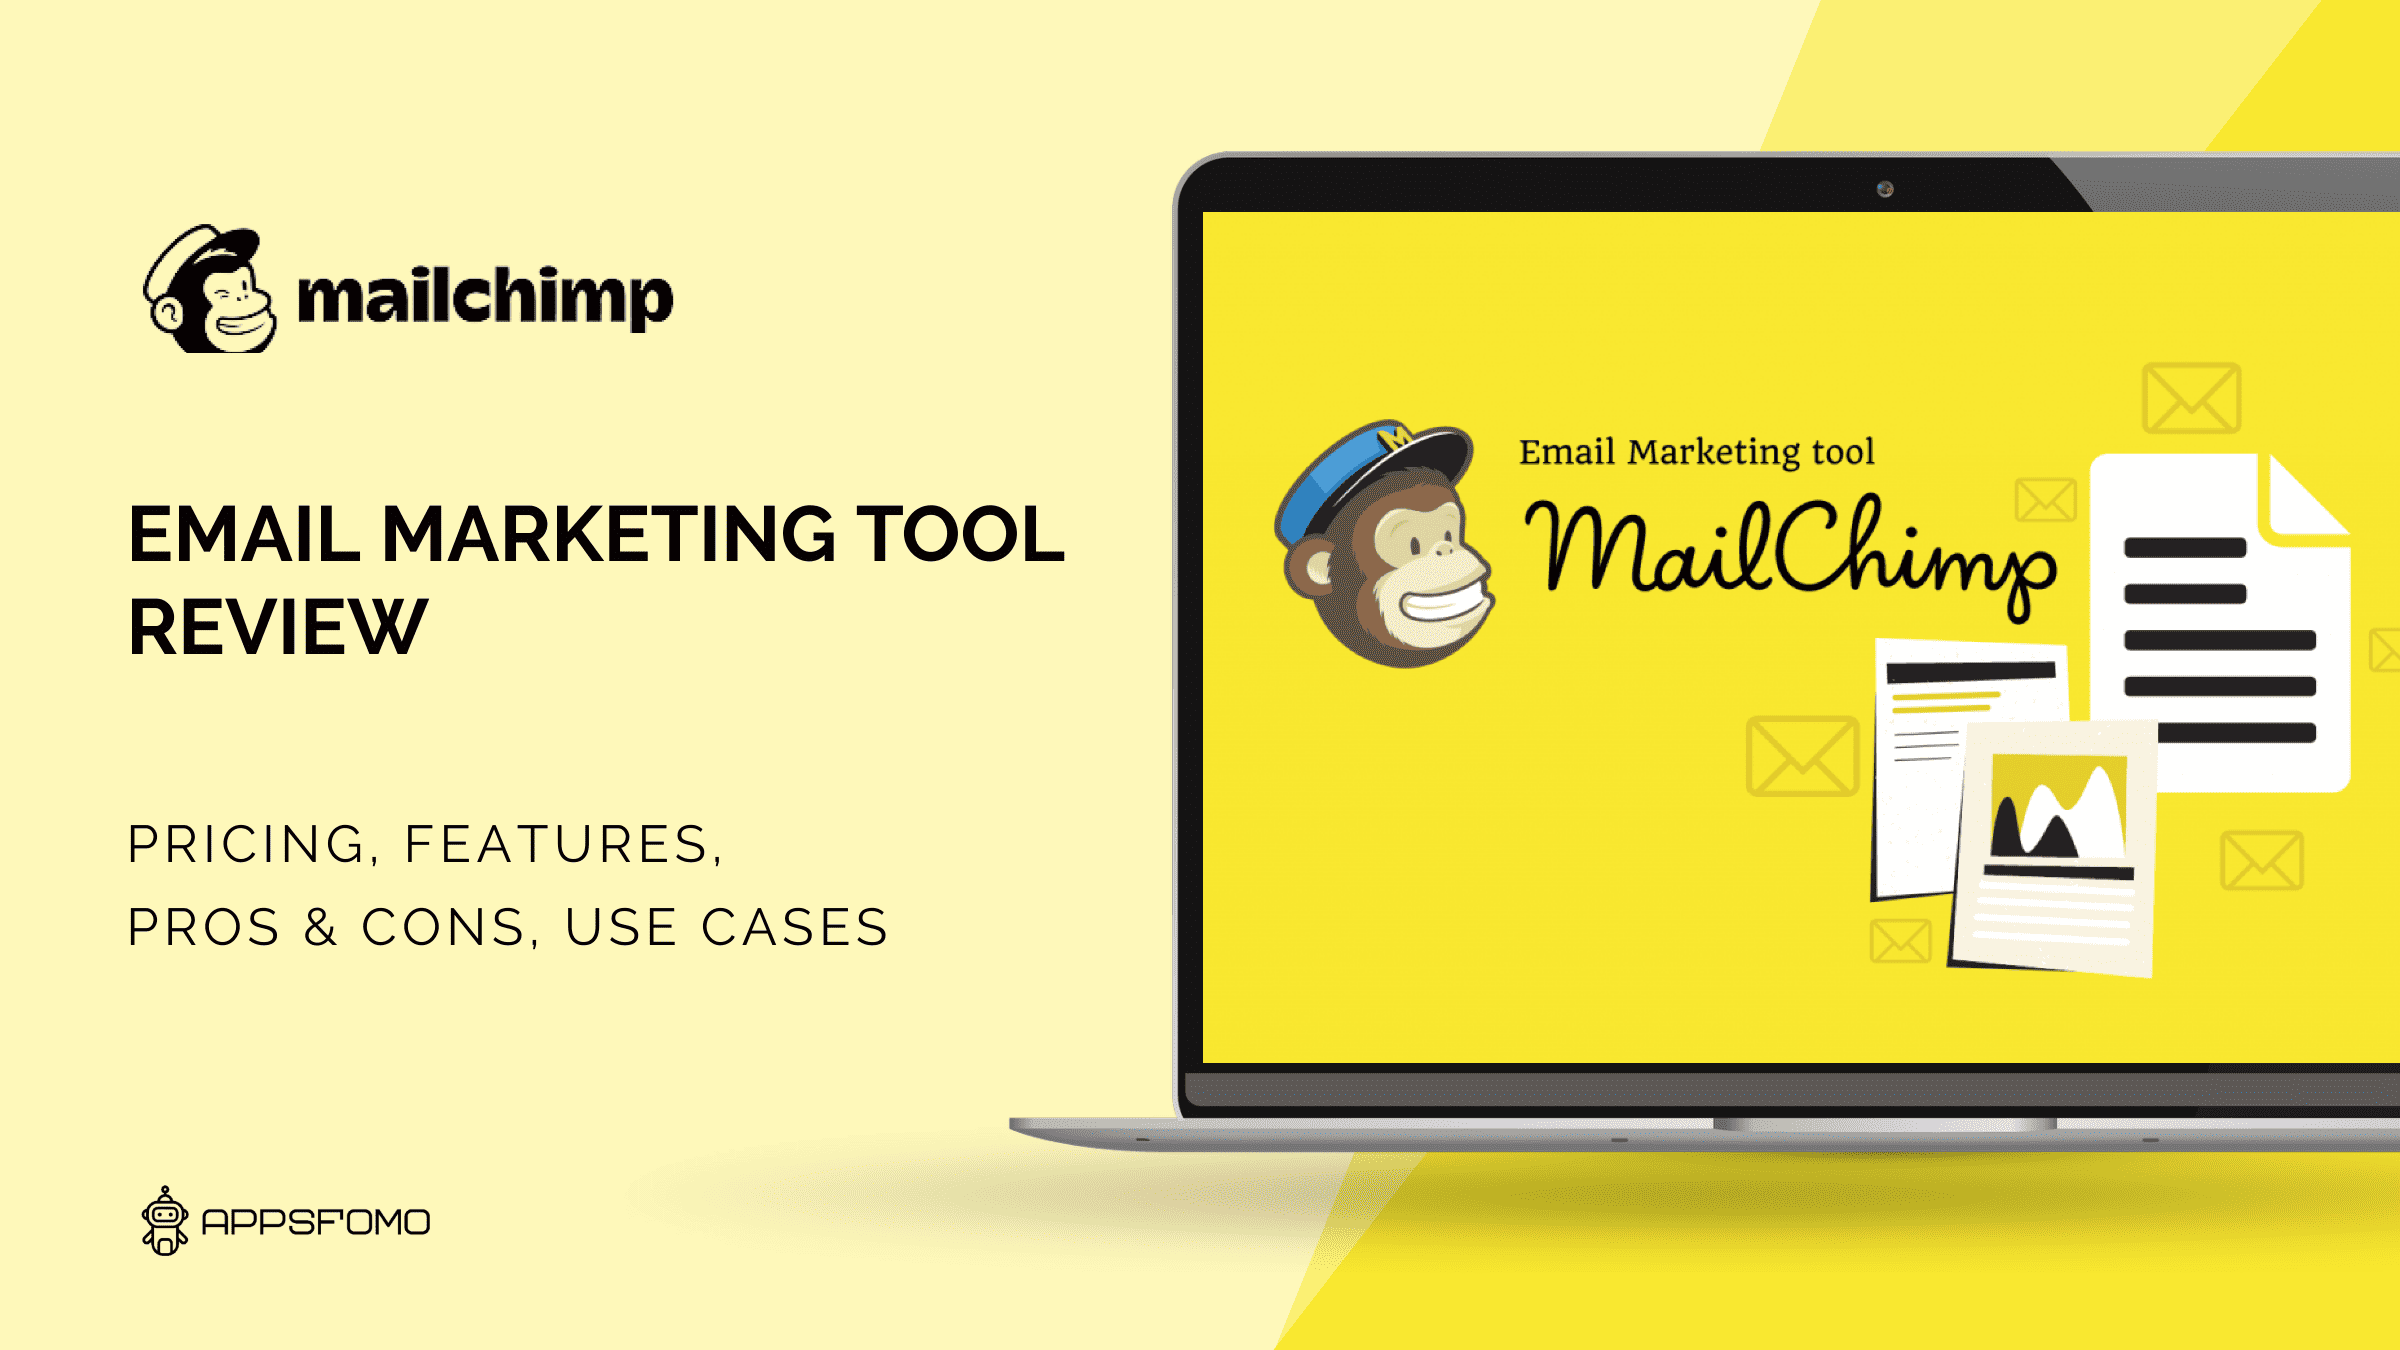 Mailchimp: Is this Popular Email Marketing Tool Right for Your Business?